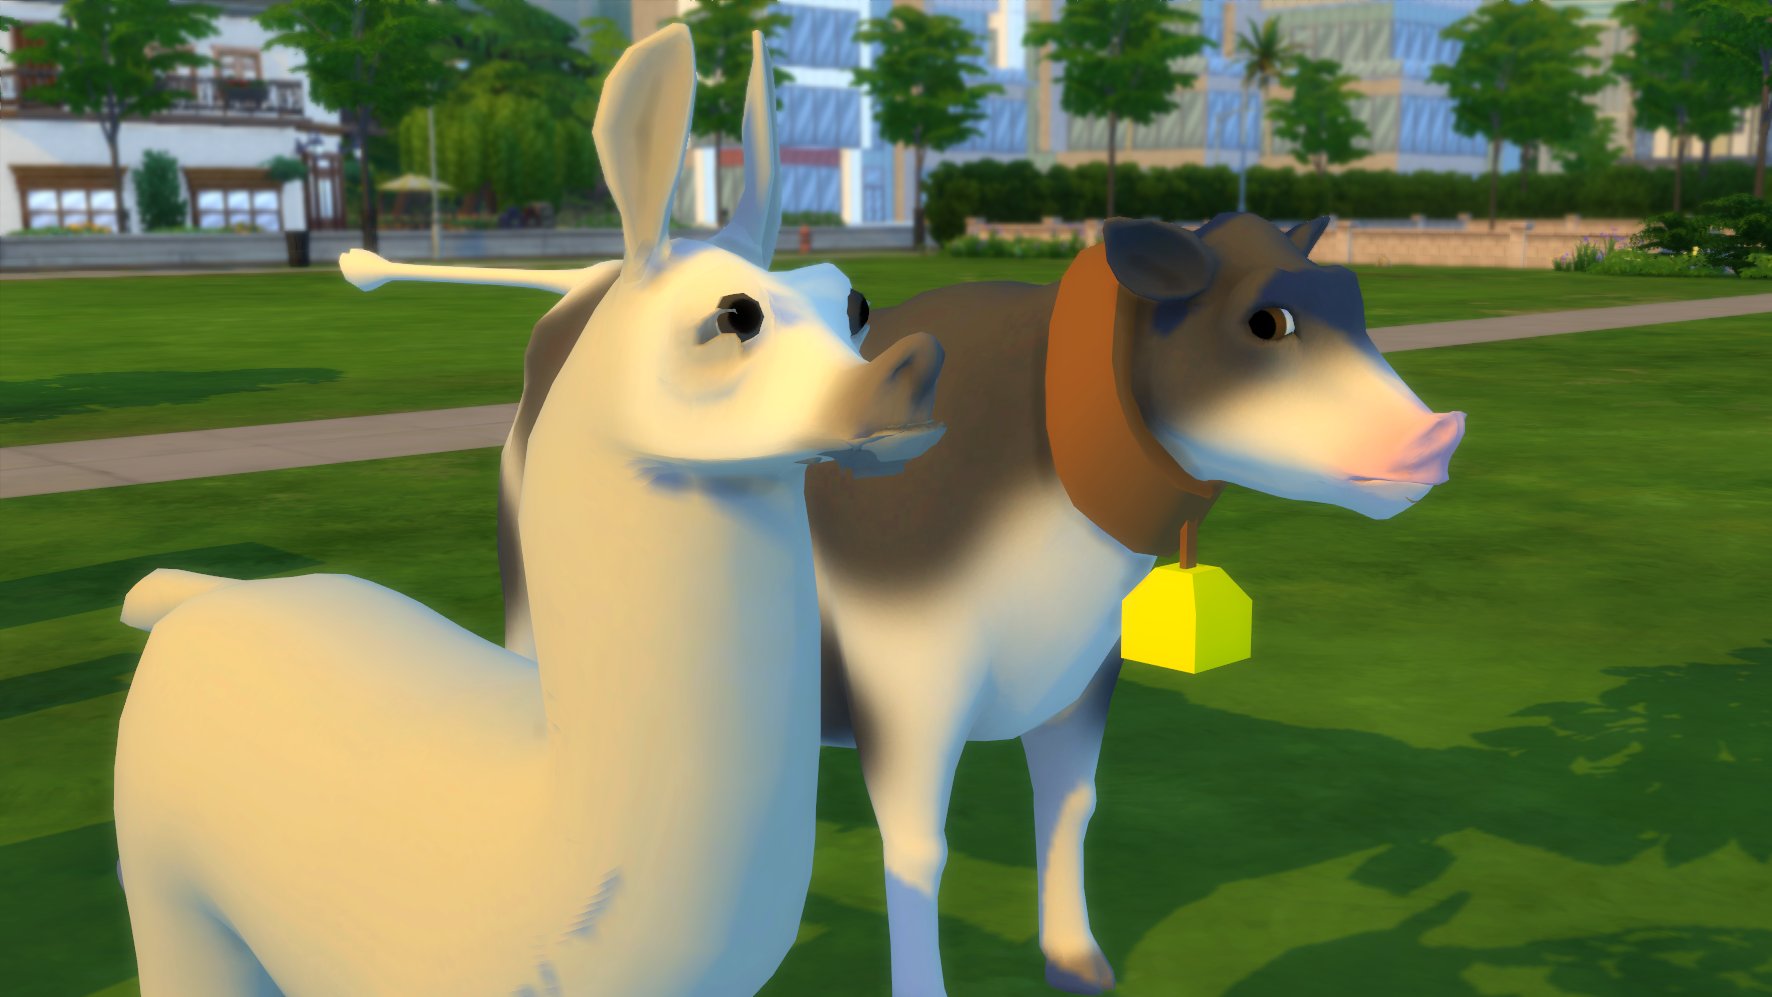 The Sims 4 Cottage Living: Pre-Texture 3D Animal Models | SimsVIP